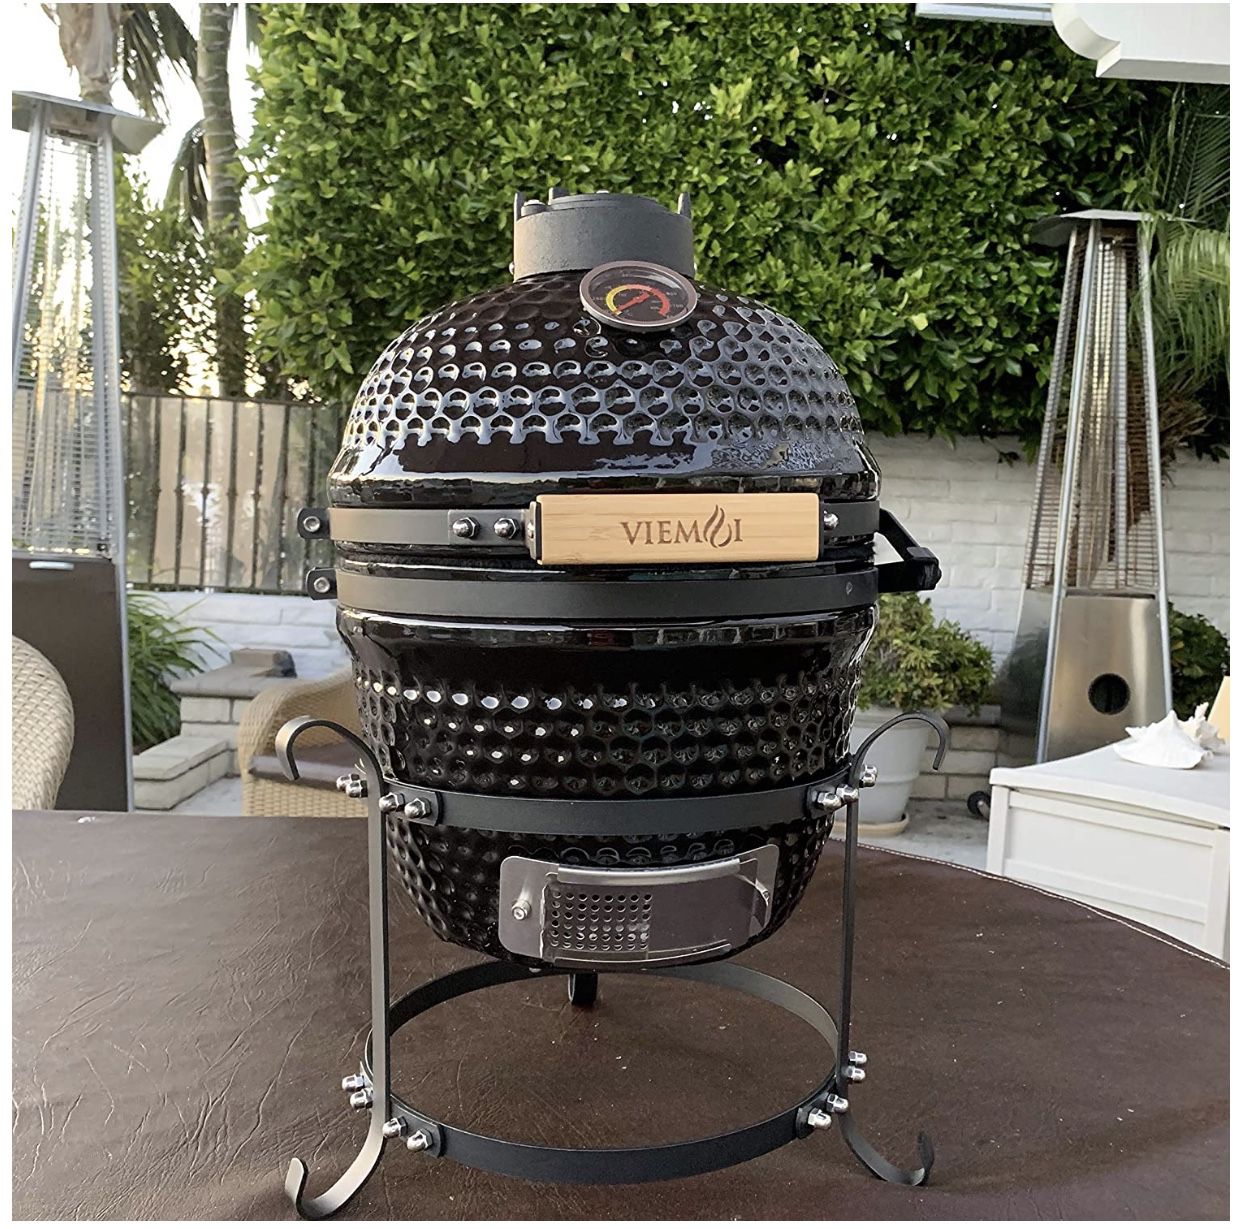 Viemoi Kamado Grill Mini Kamado Charcoal Grill Barbecue Cooking System Black with Stainless Steel Grid